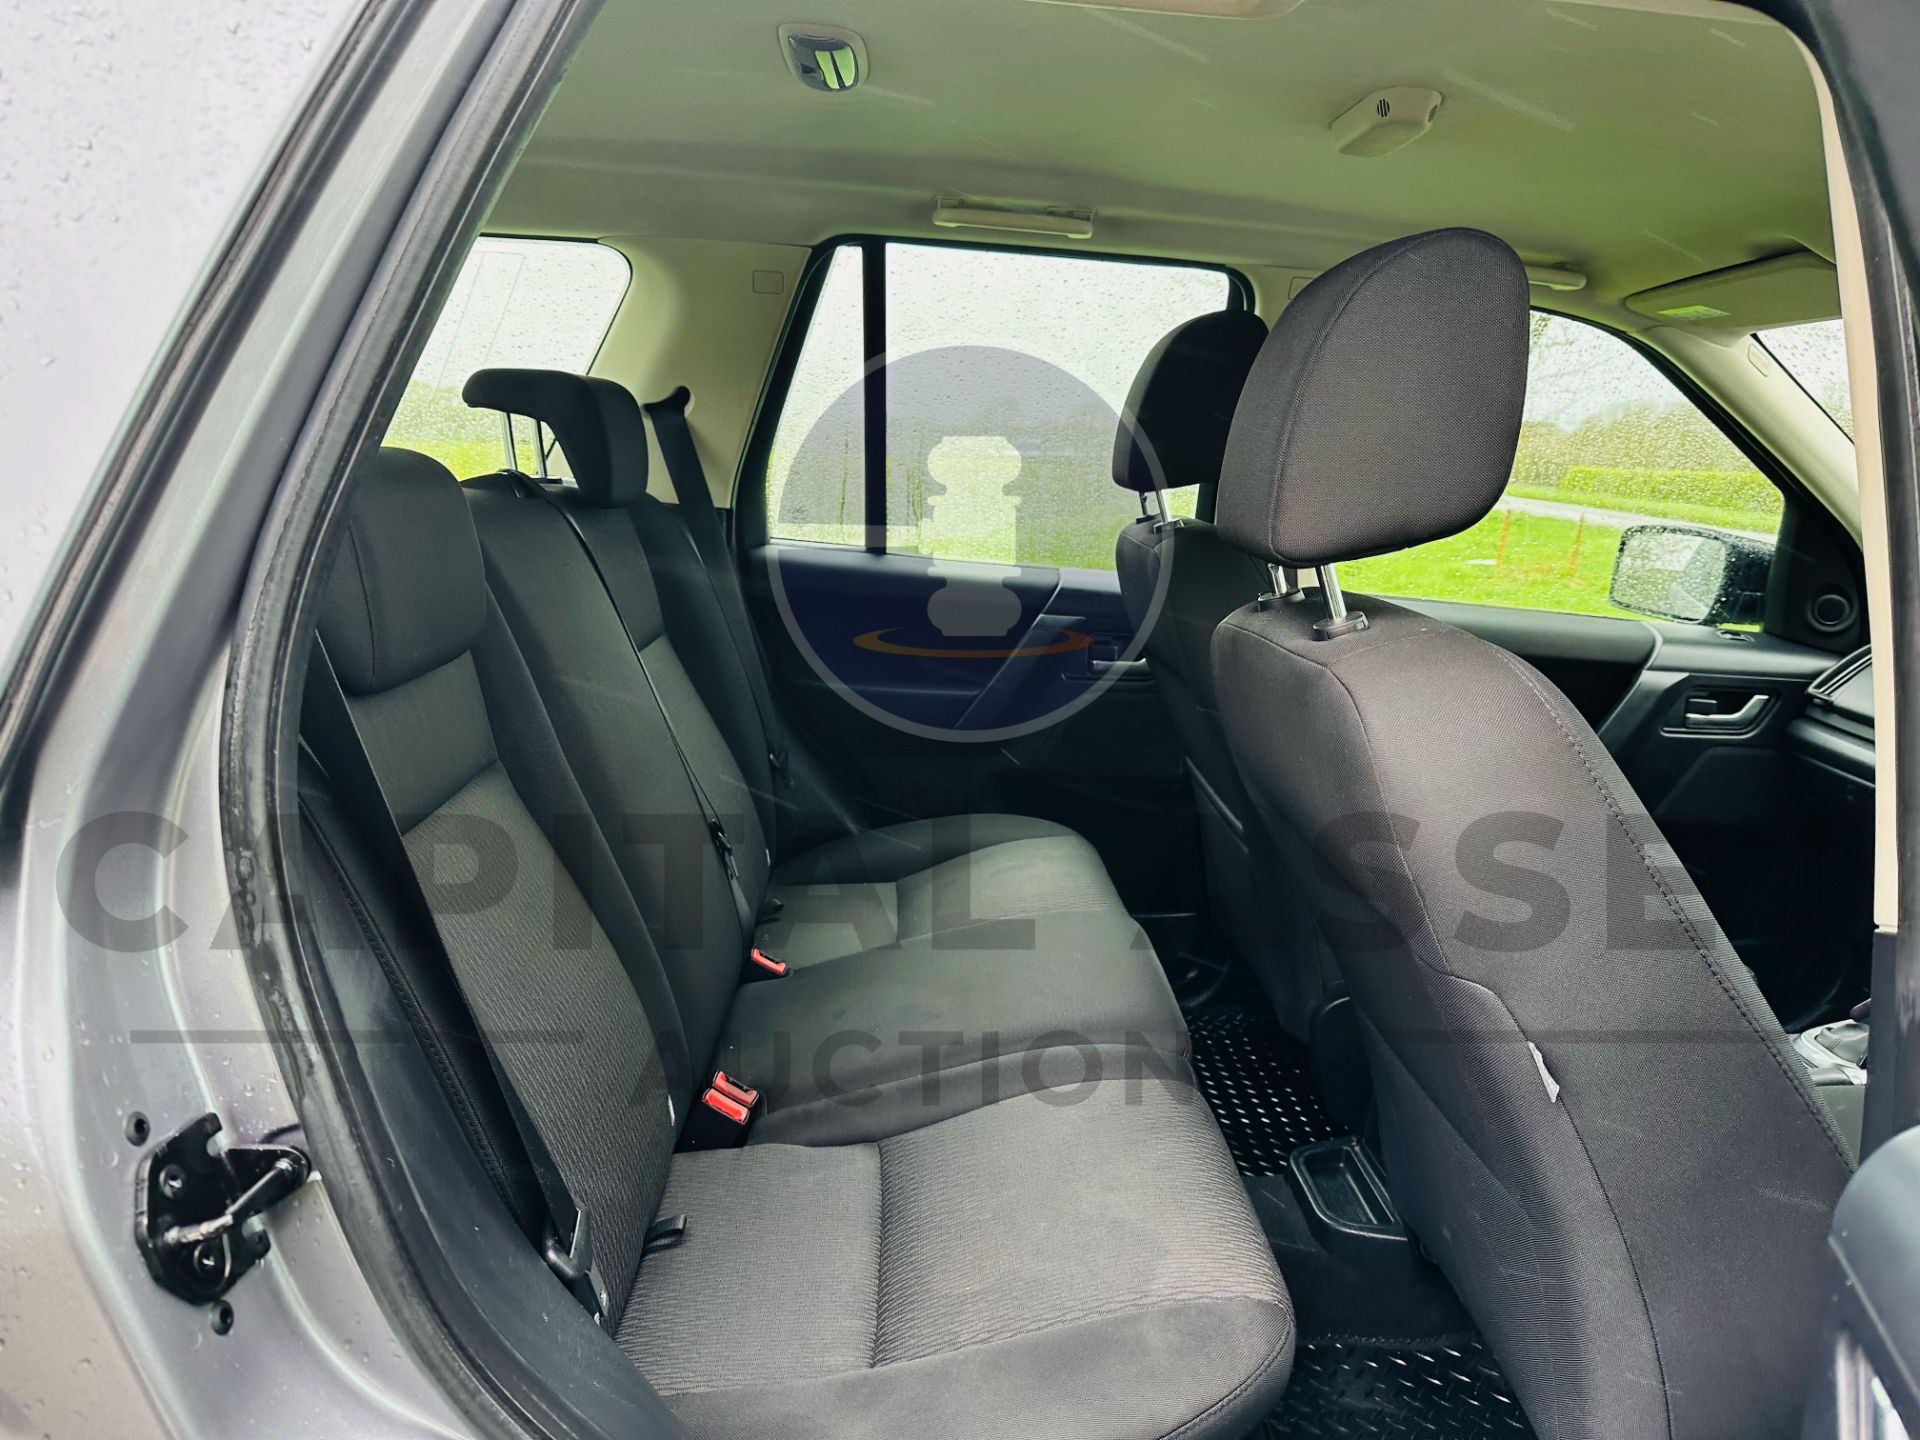 (ON SALE) LANDROVER FREELANDER 2.2TD4 S EDITION "AUTO - 2012 MODEL - AIR CON - FSH - Image 13 of 33